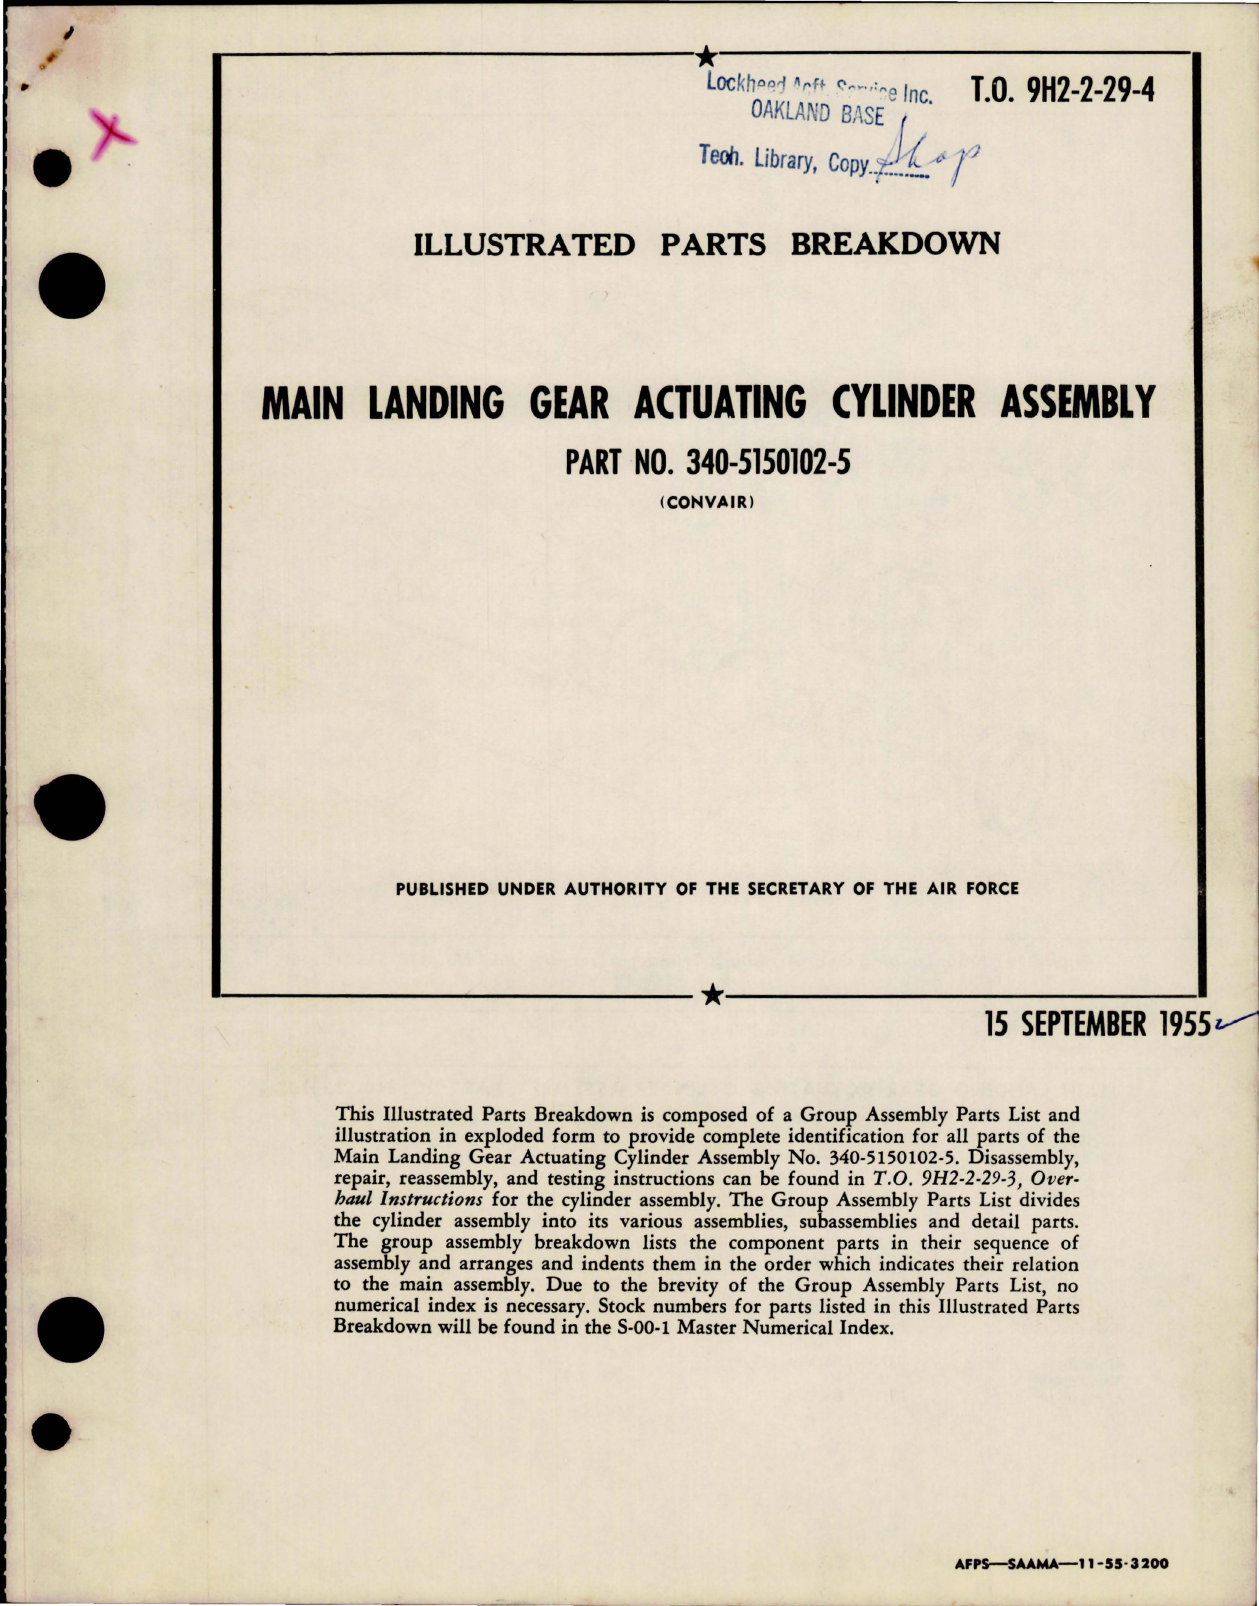 Sample page 1 from AirCorps Library document: Illustrated Parts Breakdown for Main Landing Gear Actuating Cylinder Assembly - Part 340-5150102-5 